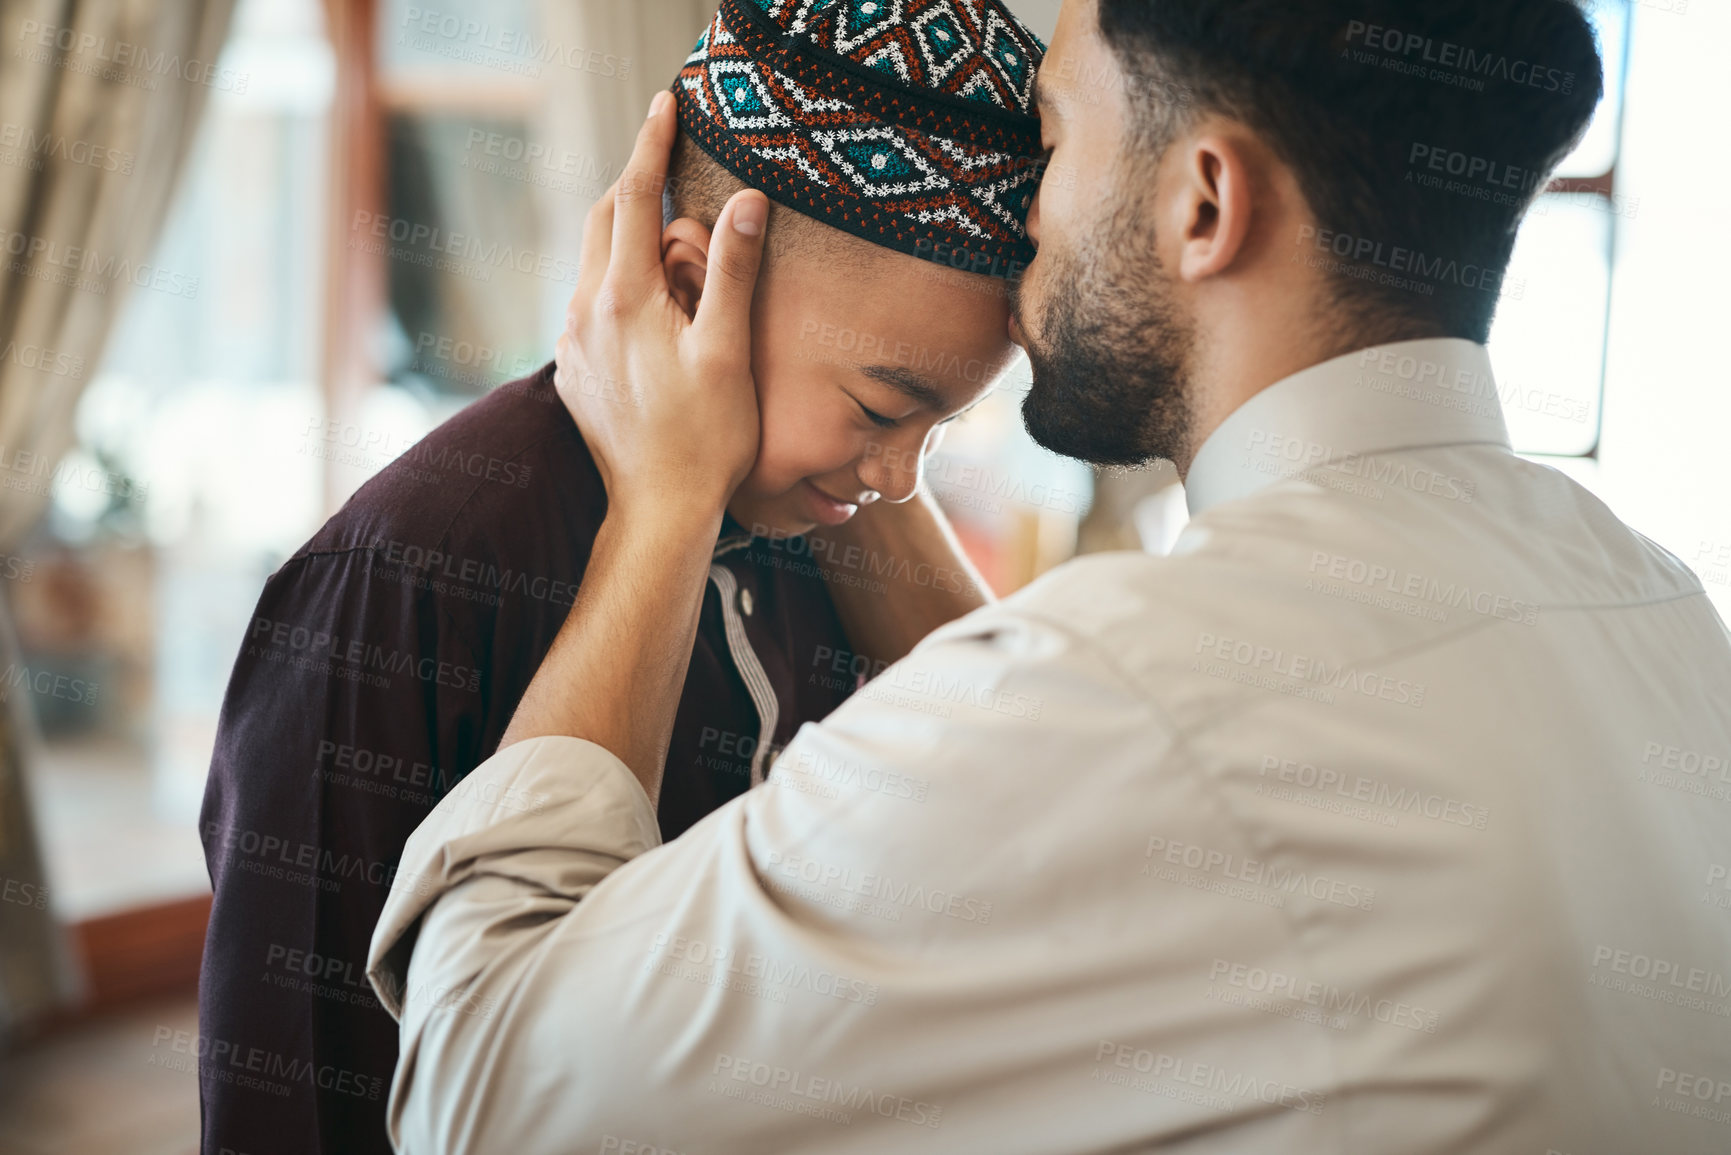 Buy stock photo Muslim father, parent or man kissing his son on the forehead, bonding and showing affection at home. Happy, smiling and Arab boy embracing, celebrating traditional holiday and being peaceful with dad